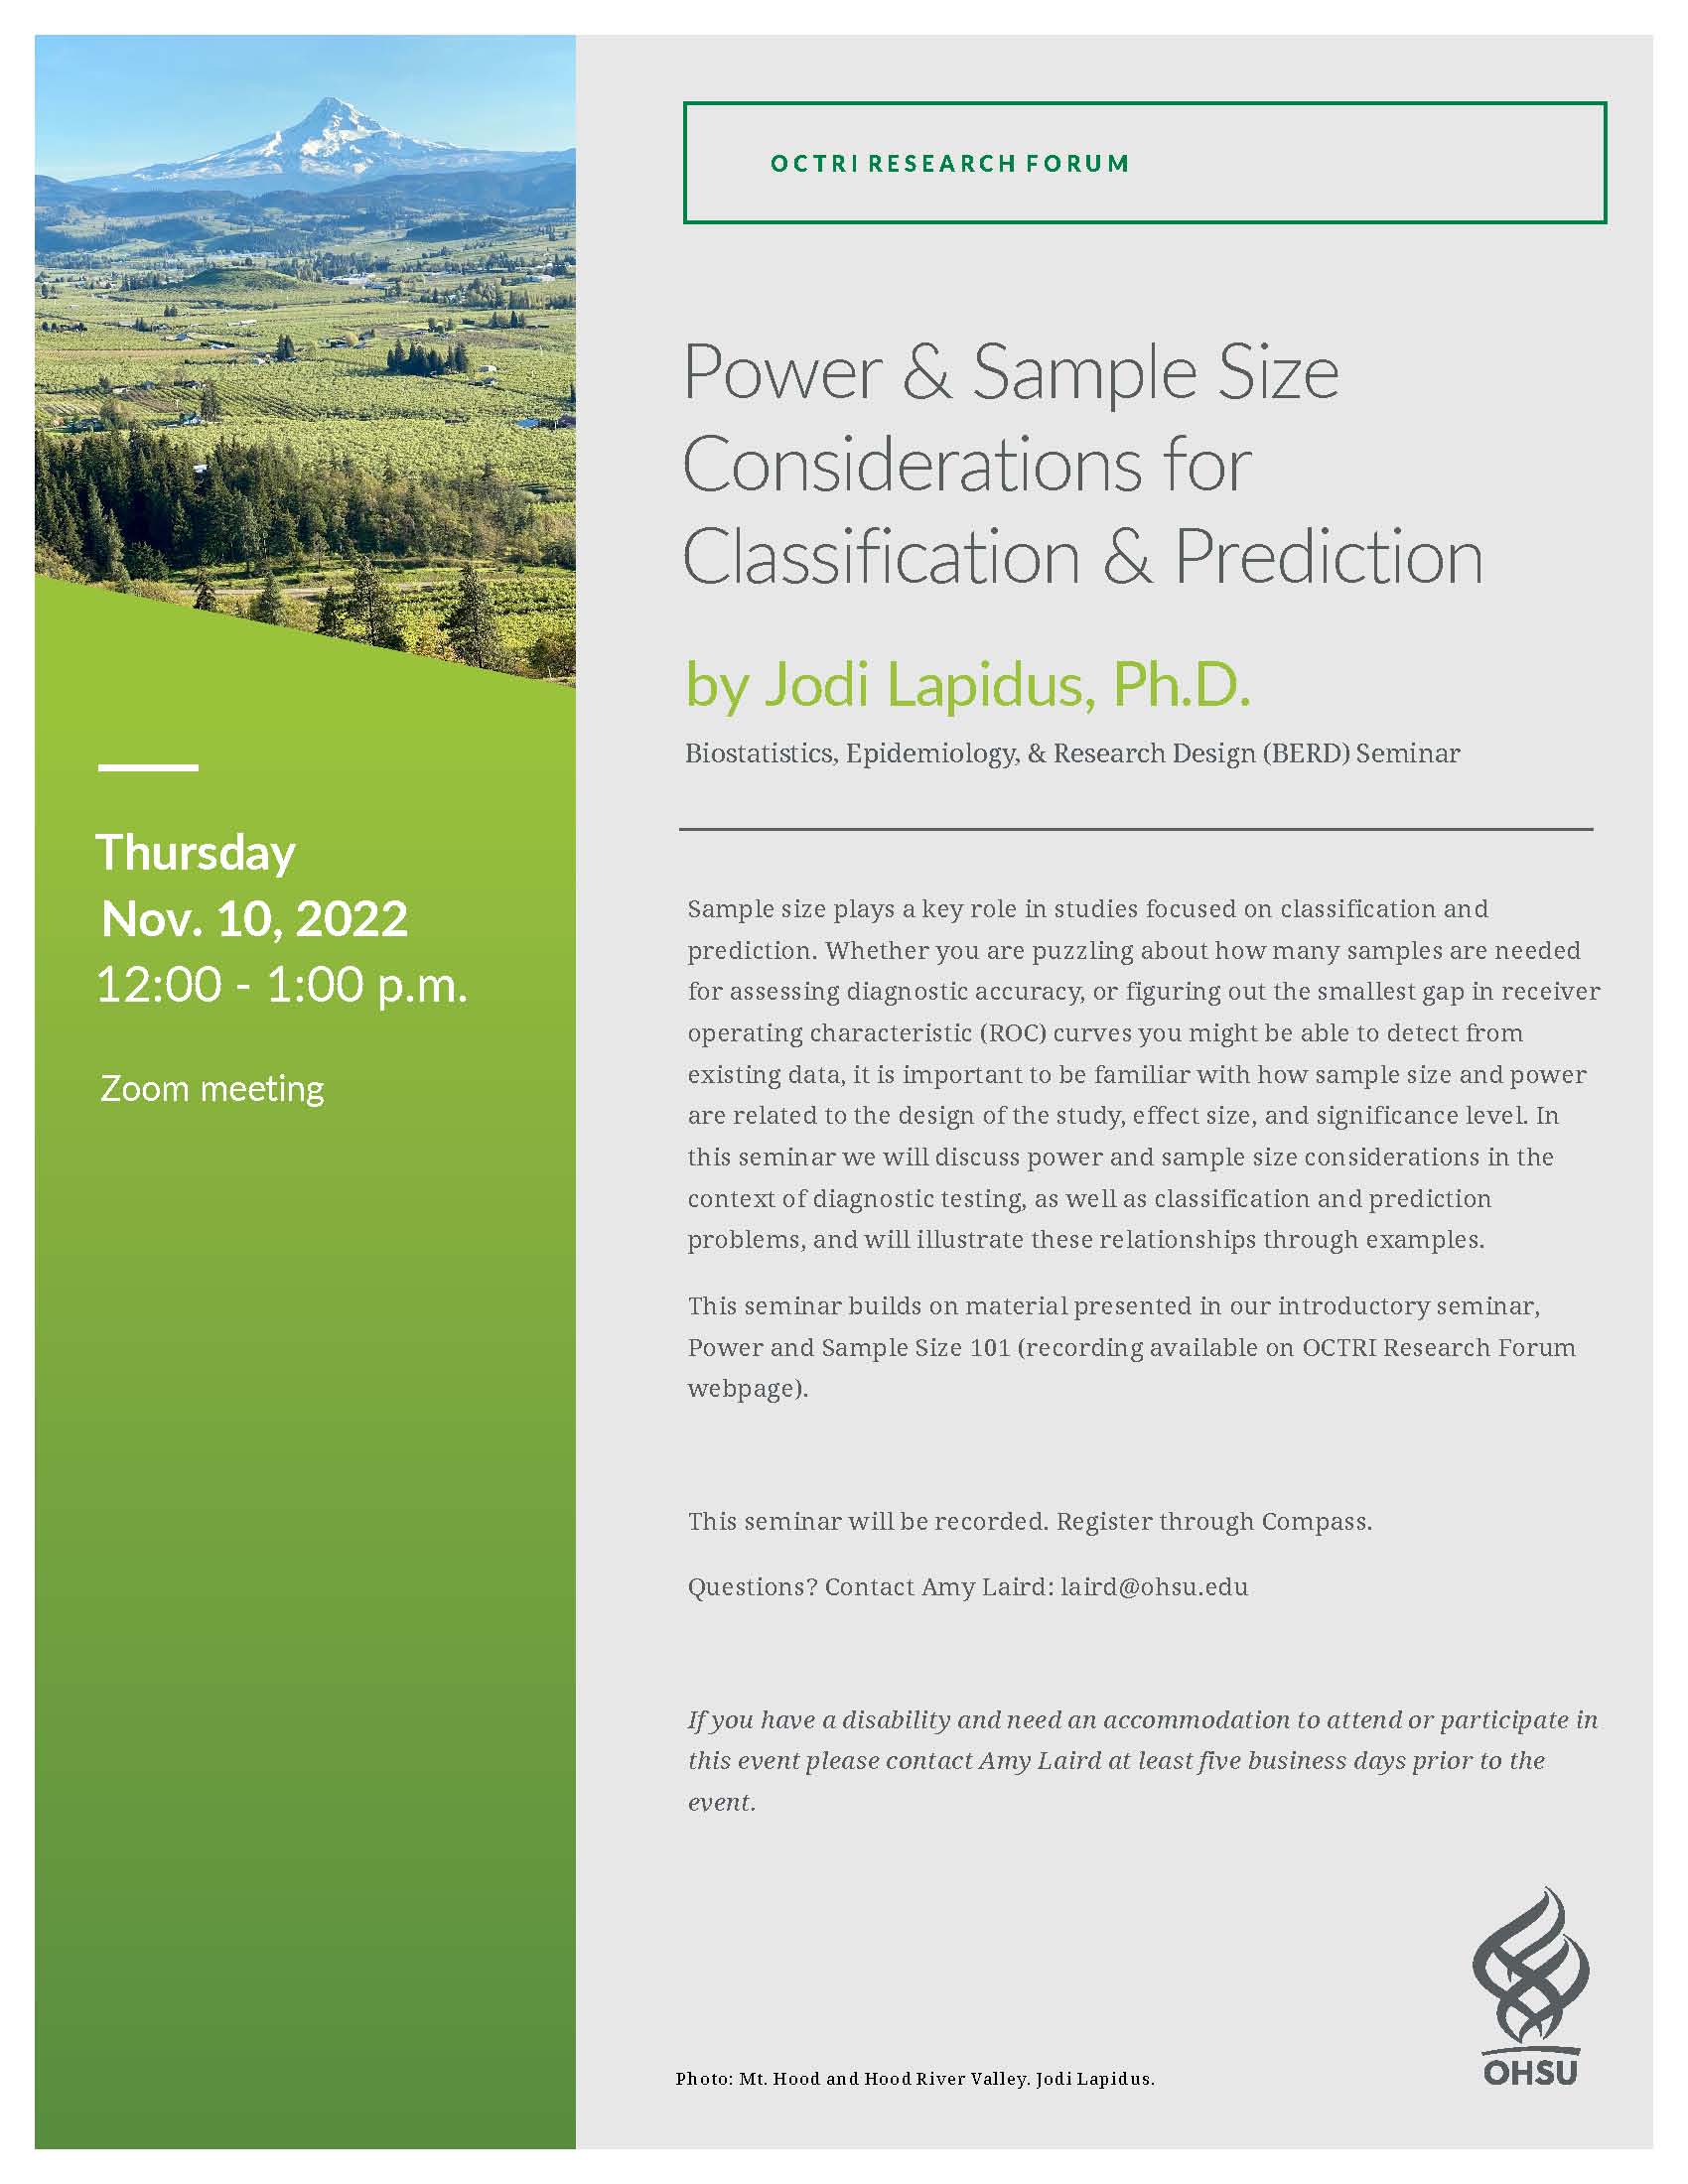 Power and Sample Size Considerations for Classification and Prediction Flier